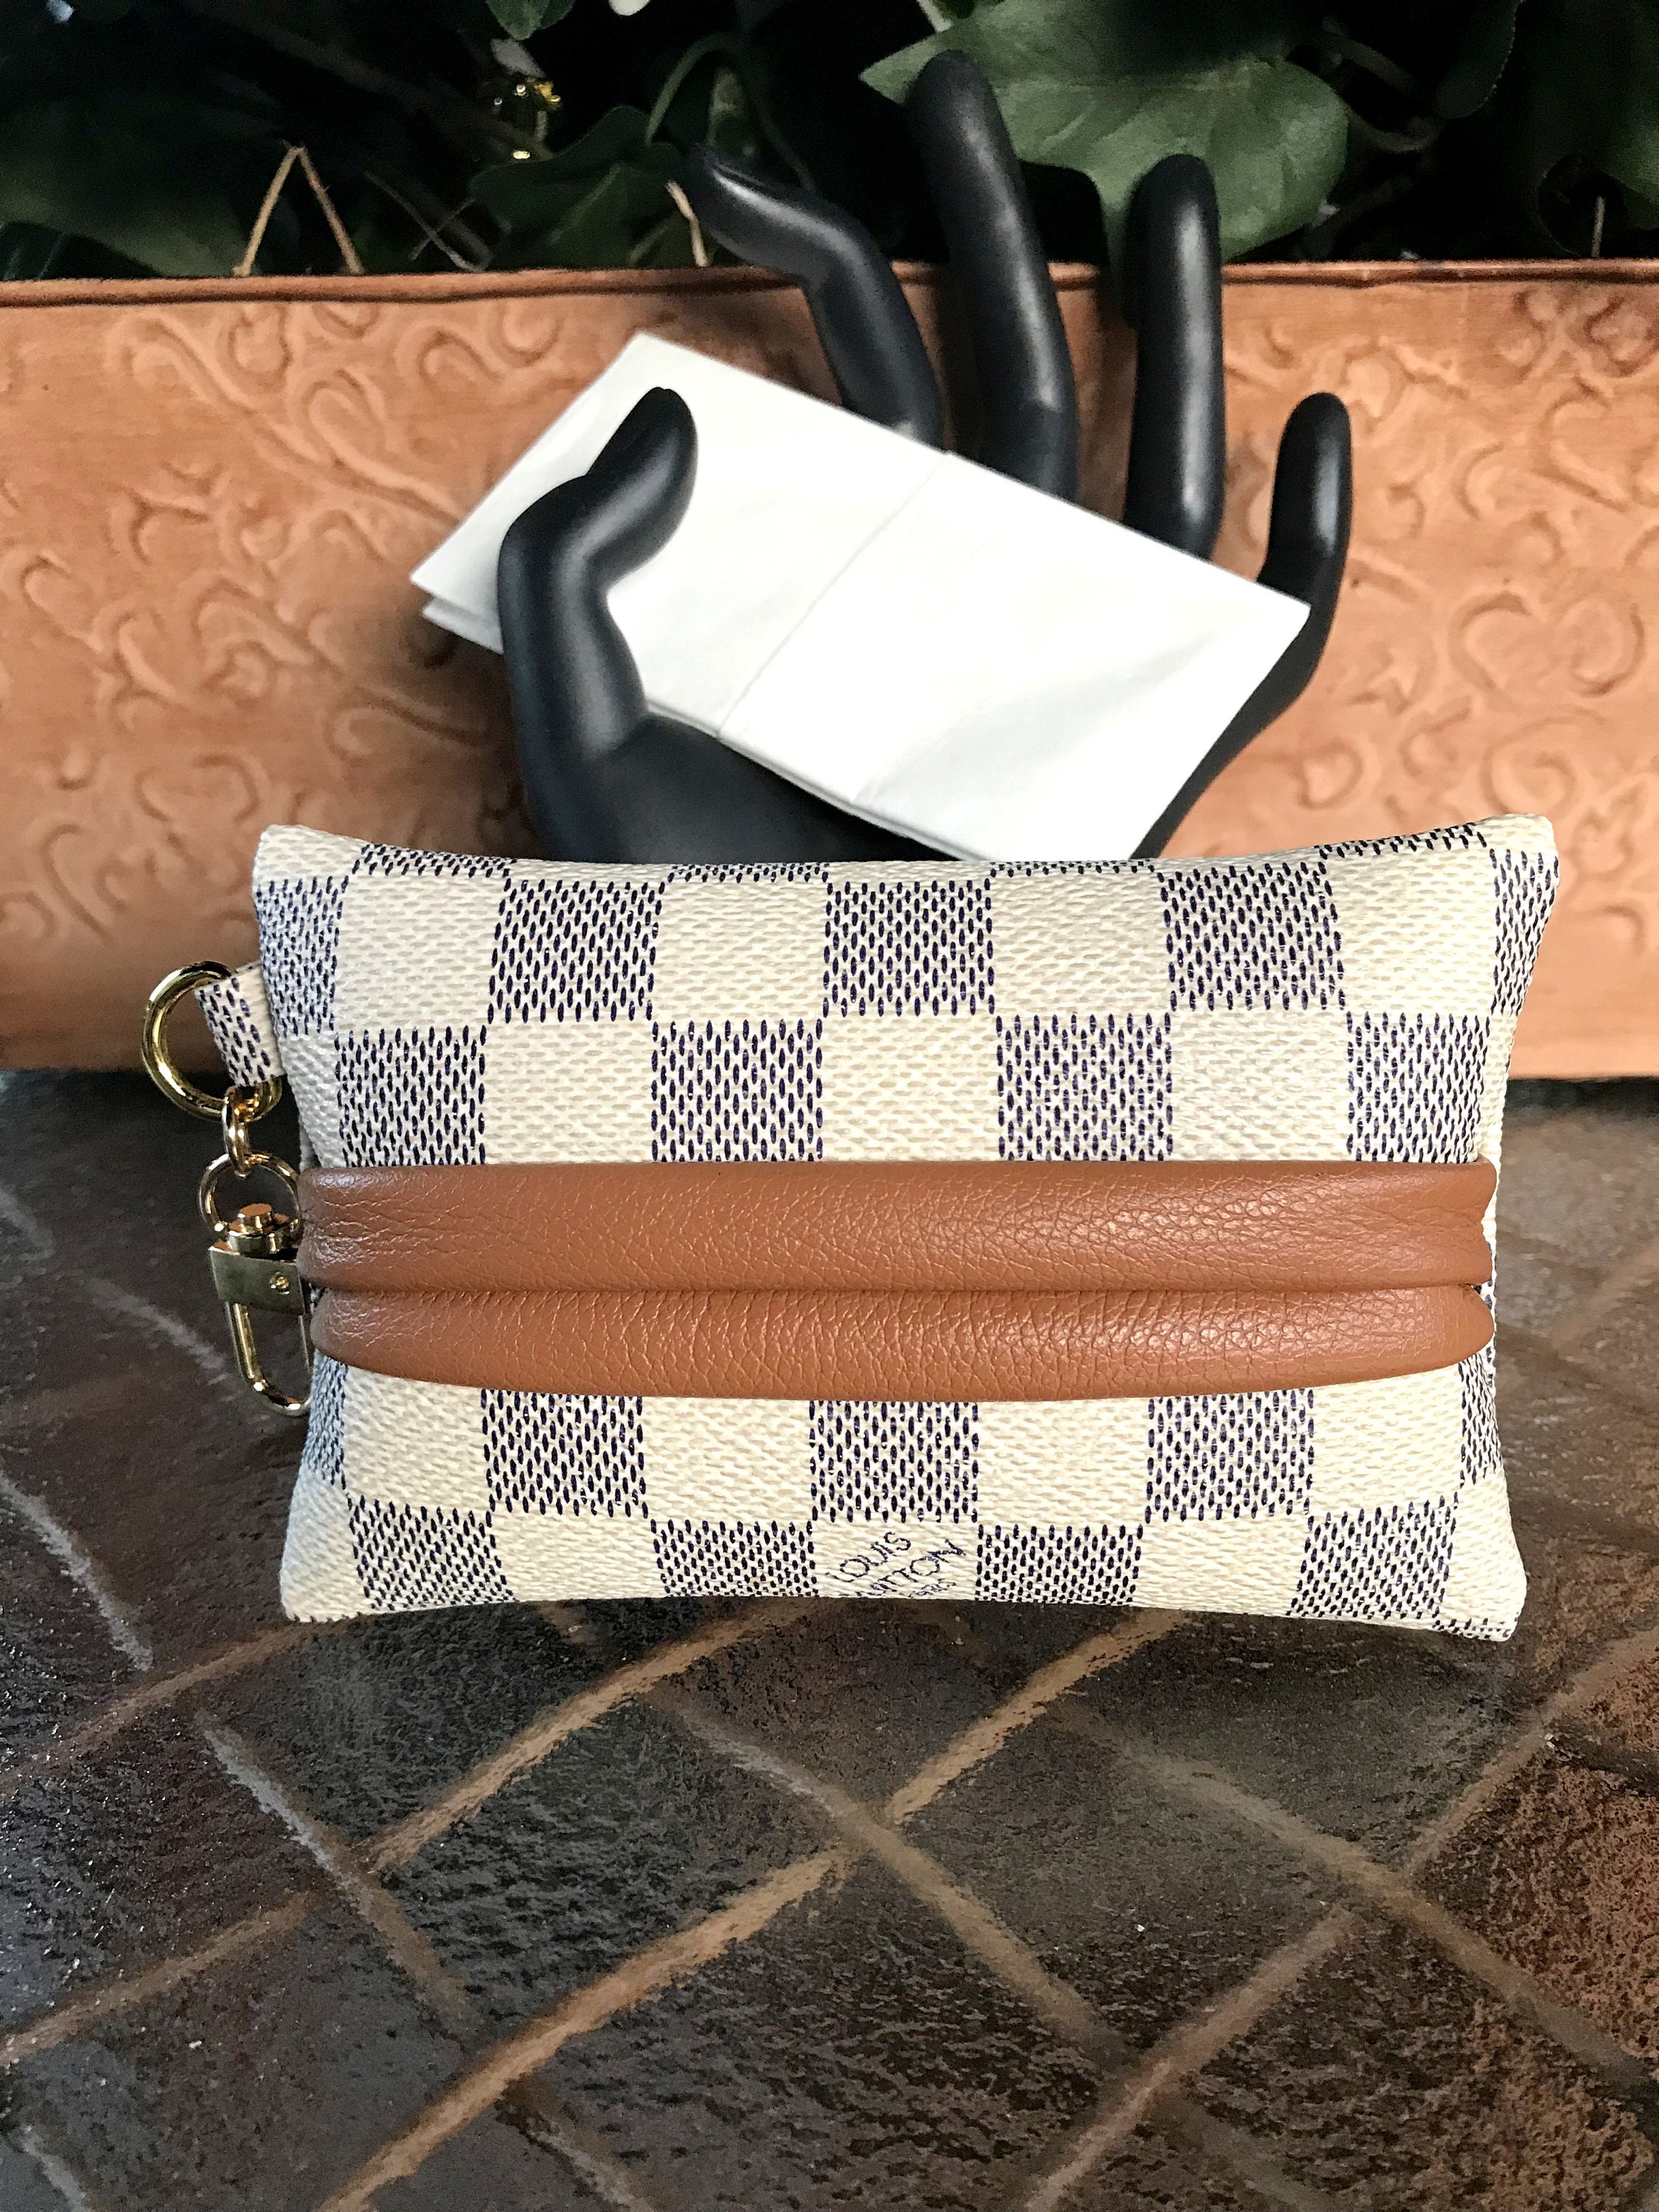 Upcycled Authentic Louis Vuitton Damier Azur Canvas Pocket | Etsy